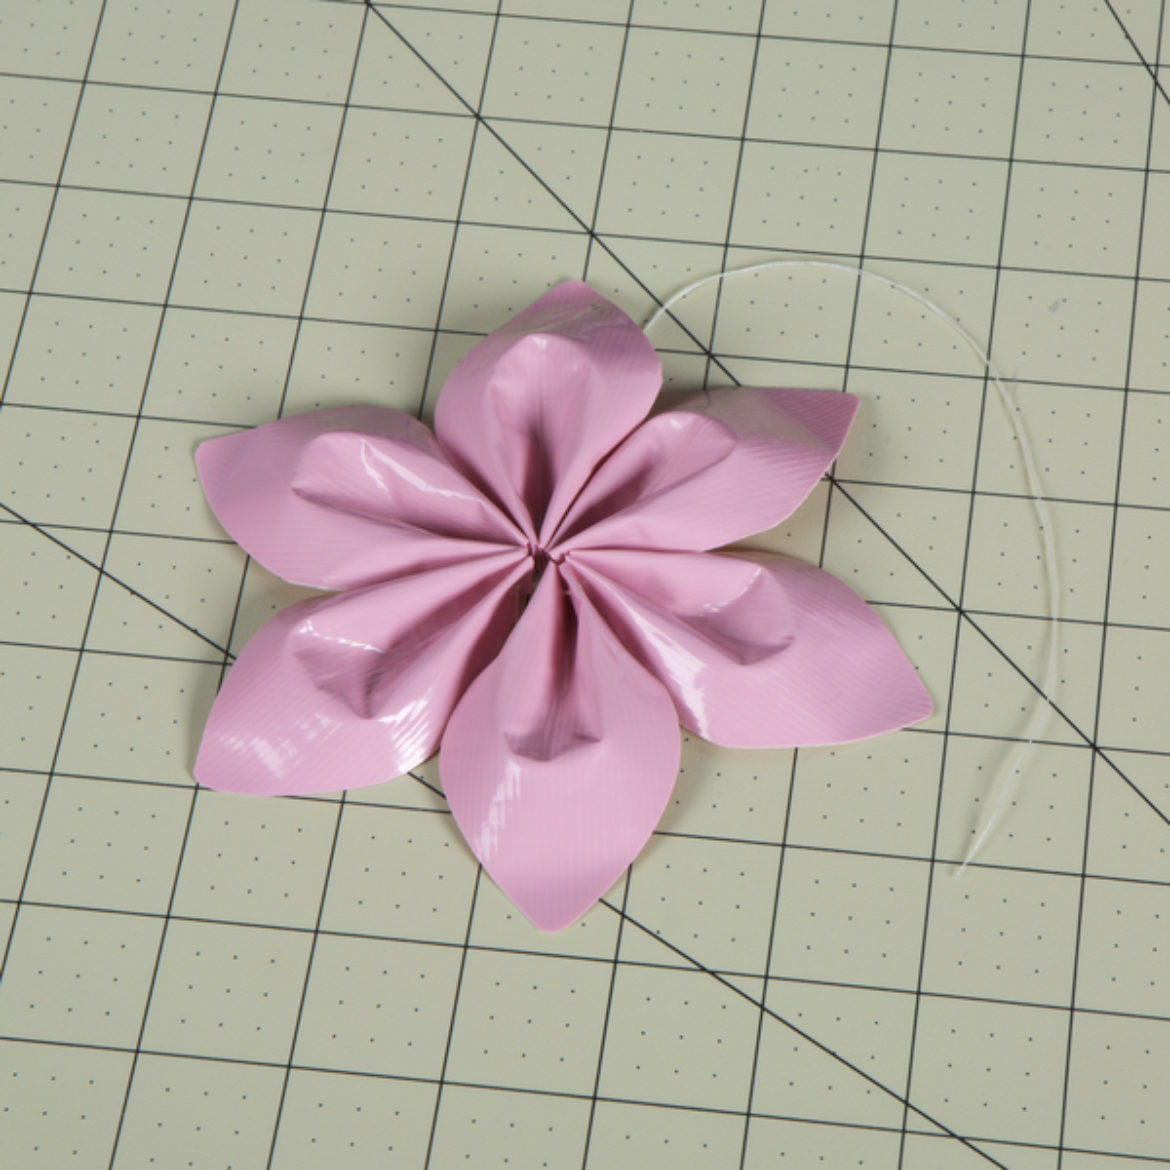 string pulled tightly to arrange the petals in shape